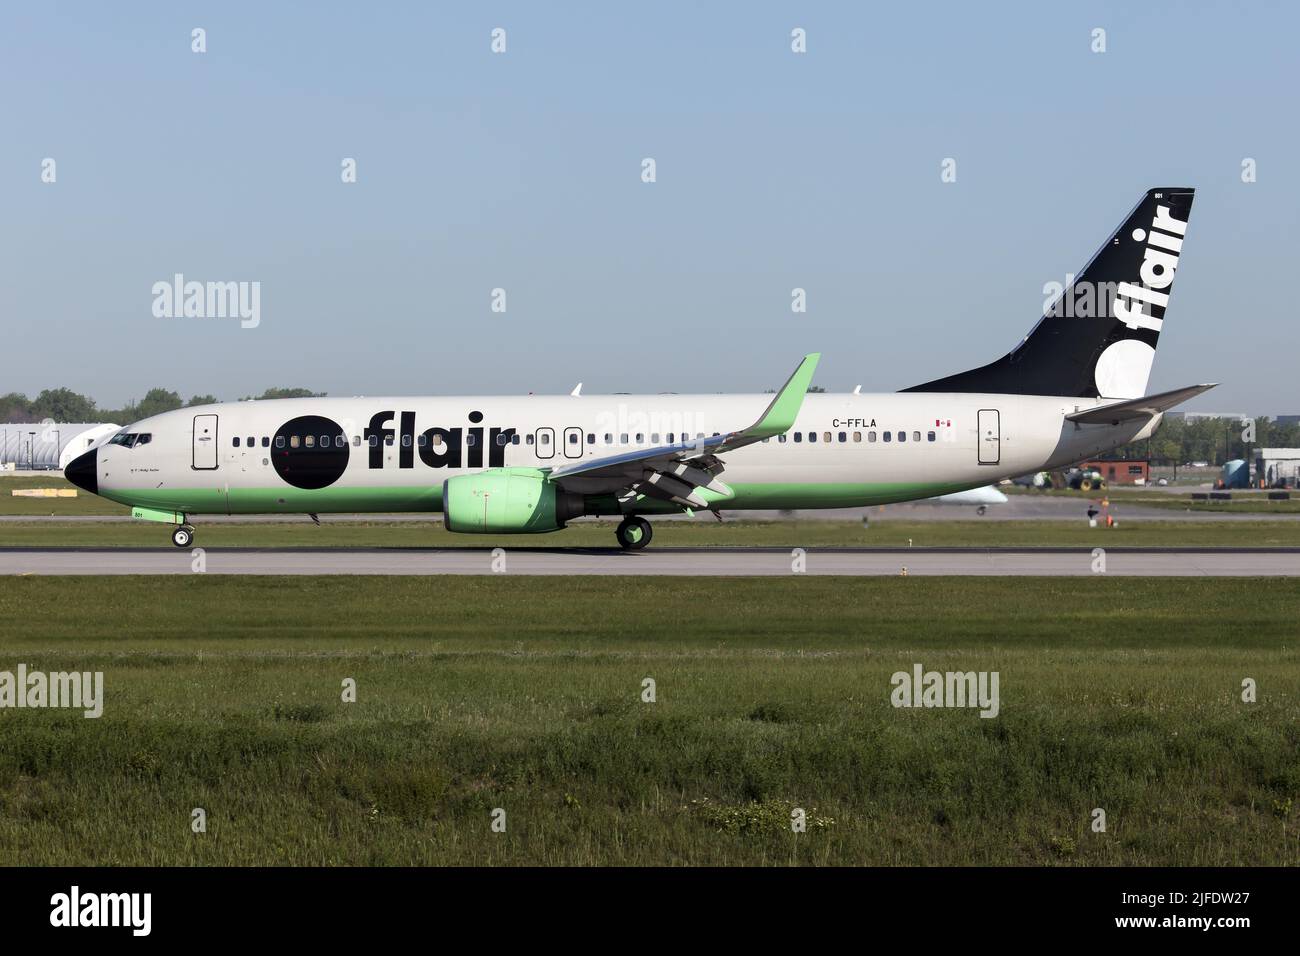 A Flair Airlines Boeing 737-8 just landed at Montreal Pierre Elliott Trudeau Int'l Airport. Flair Airlines is a Canadian low-cost airline headquartered in Edmonton, Alberta, with its main operating base at Edmonton International Airport. Stock Photo